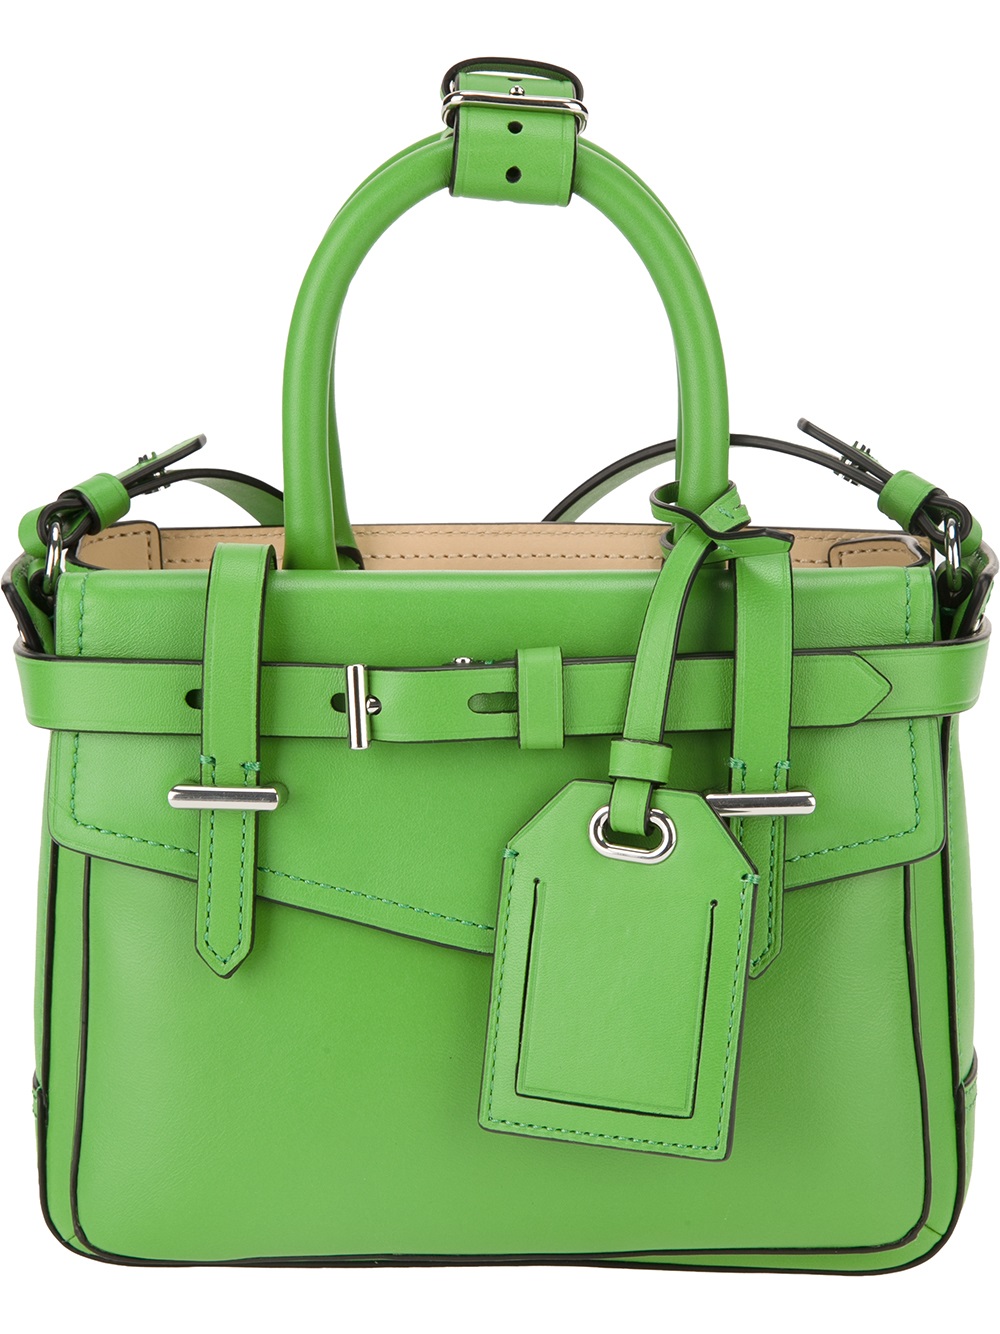 Lyst - Reed krakoff Boxer Micro Bag in Green